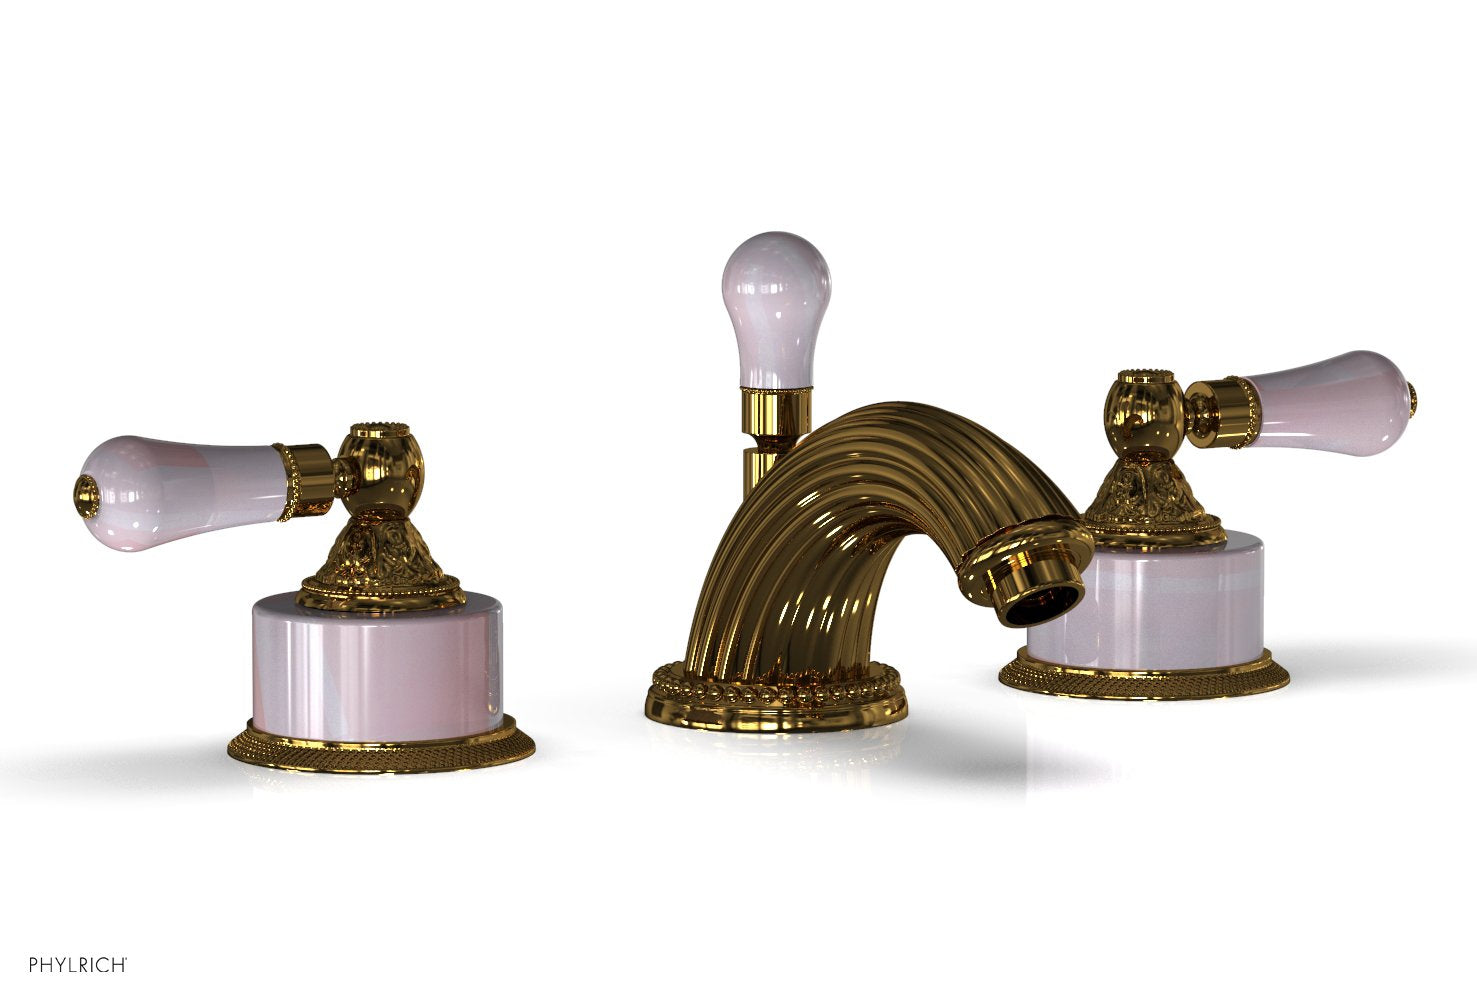 Phylrich VERSAILLES Widespread Faucet - Pink Onyx